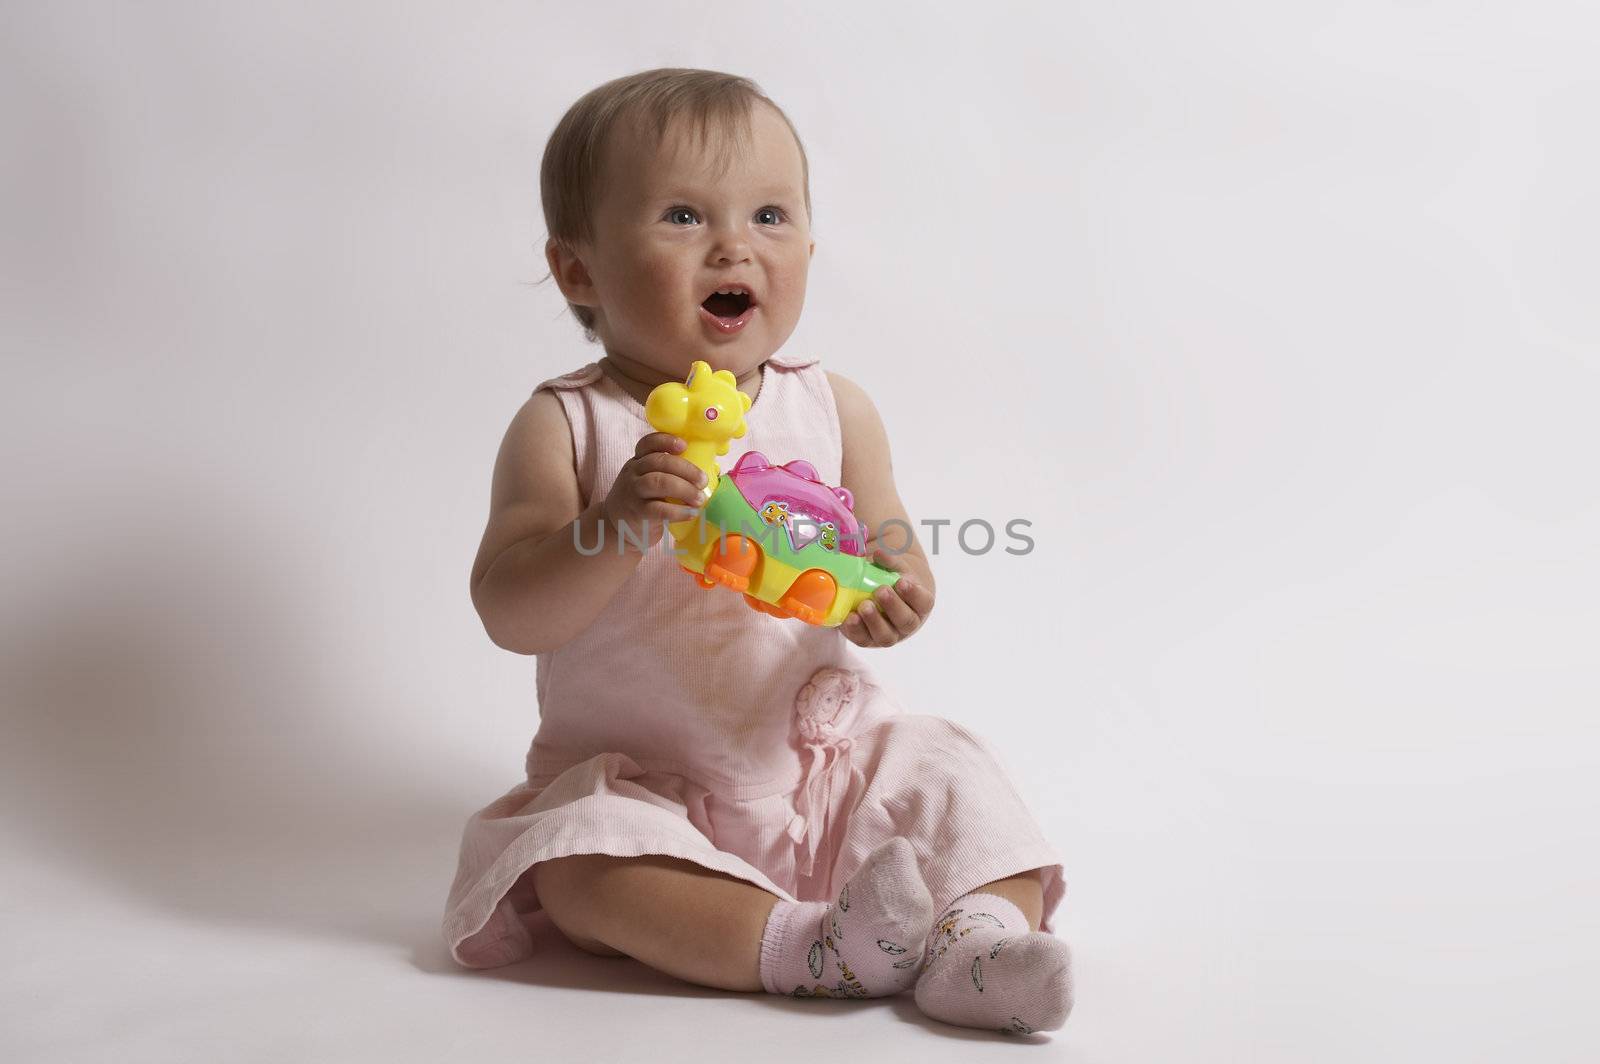 astonishment of  baby, funny little girl with toy